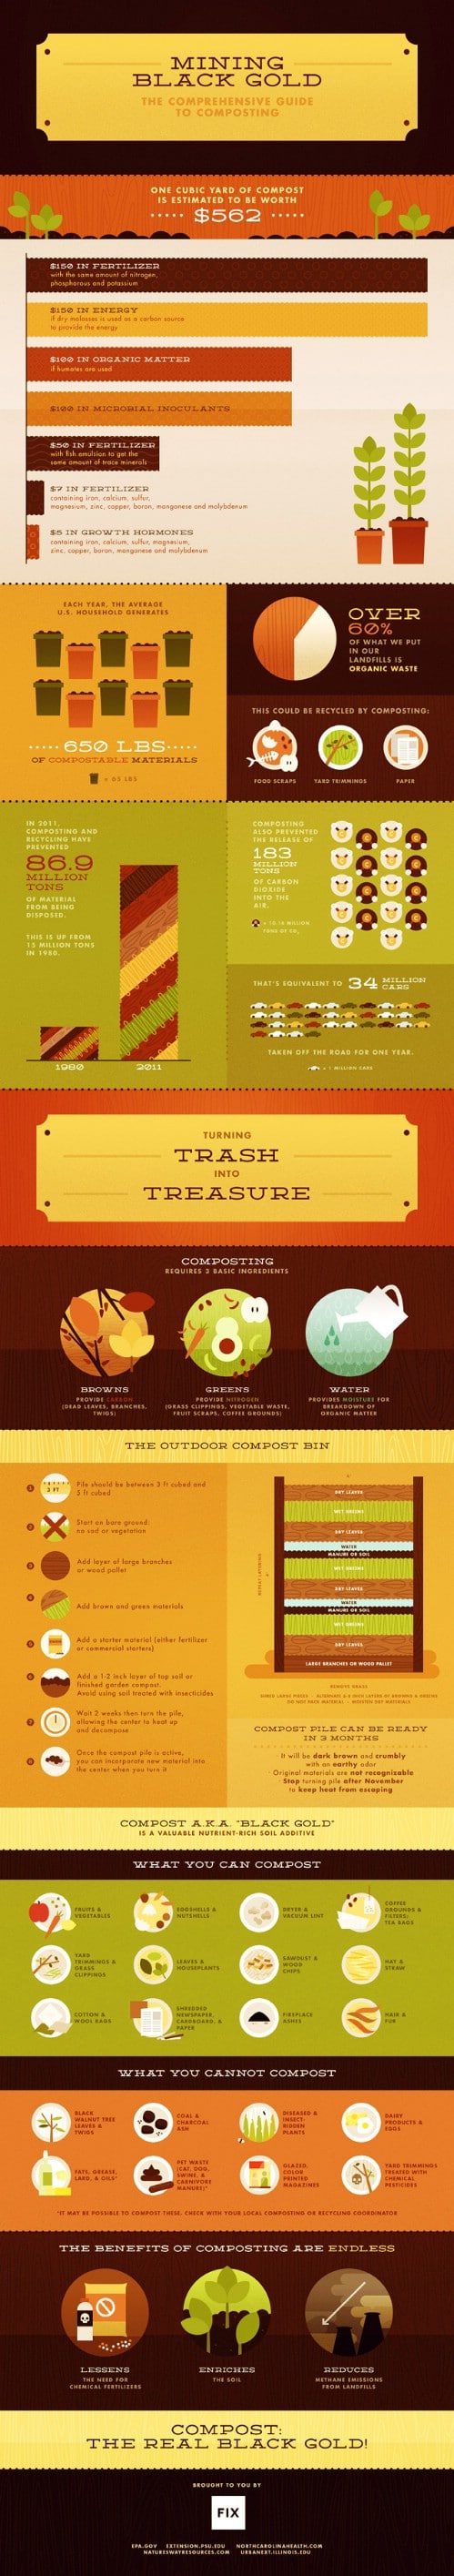 Learn all there is to know about compost with a handy infographic.